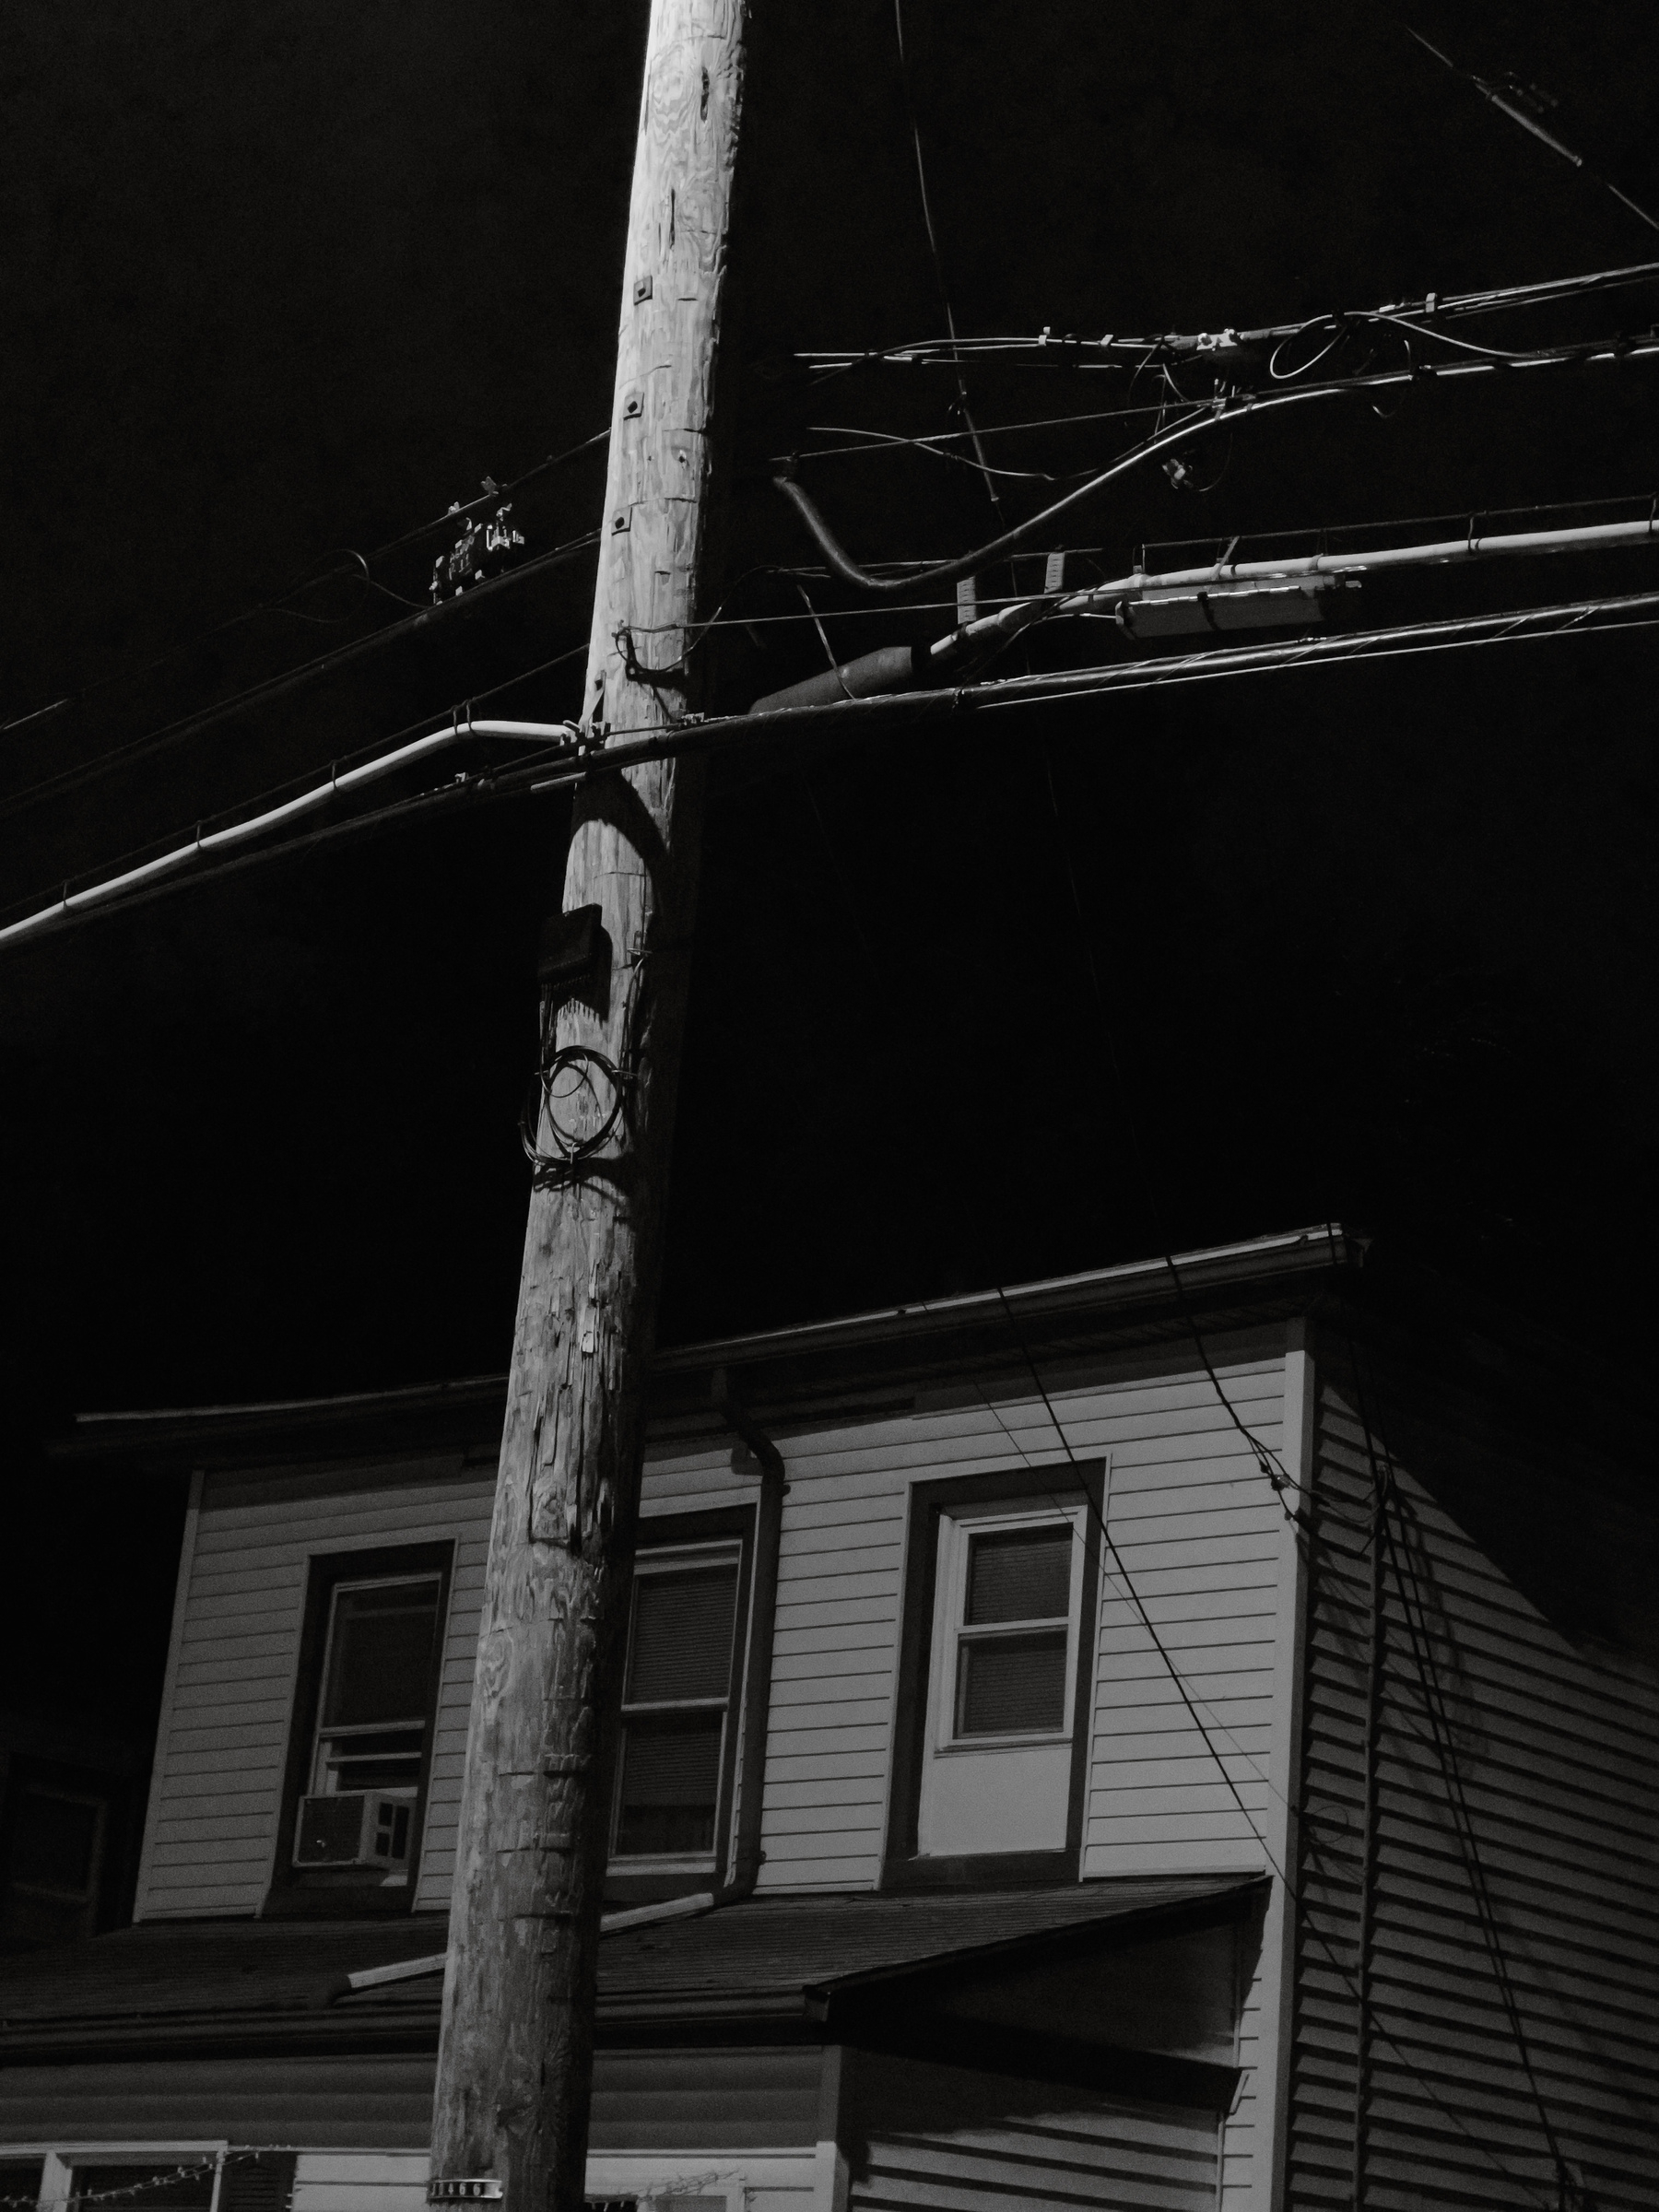 Wires, utility pole and upper part of house lit by streetlights.